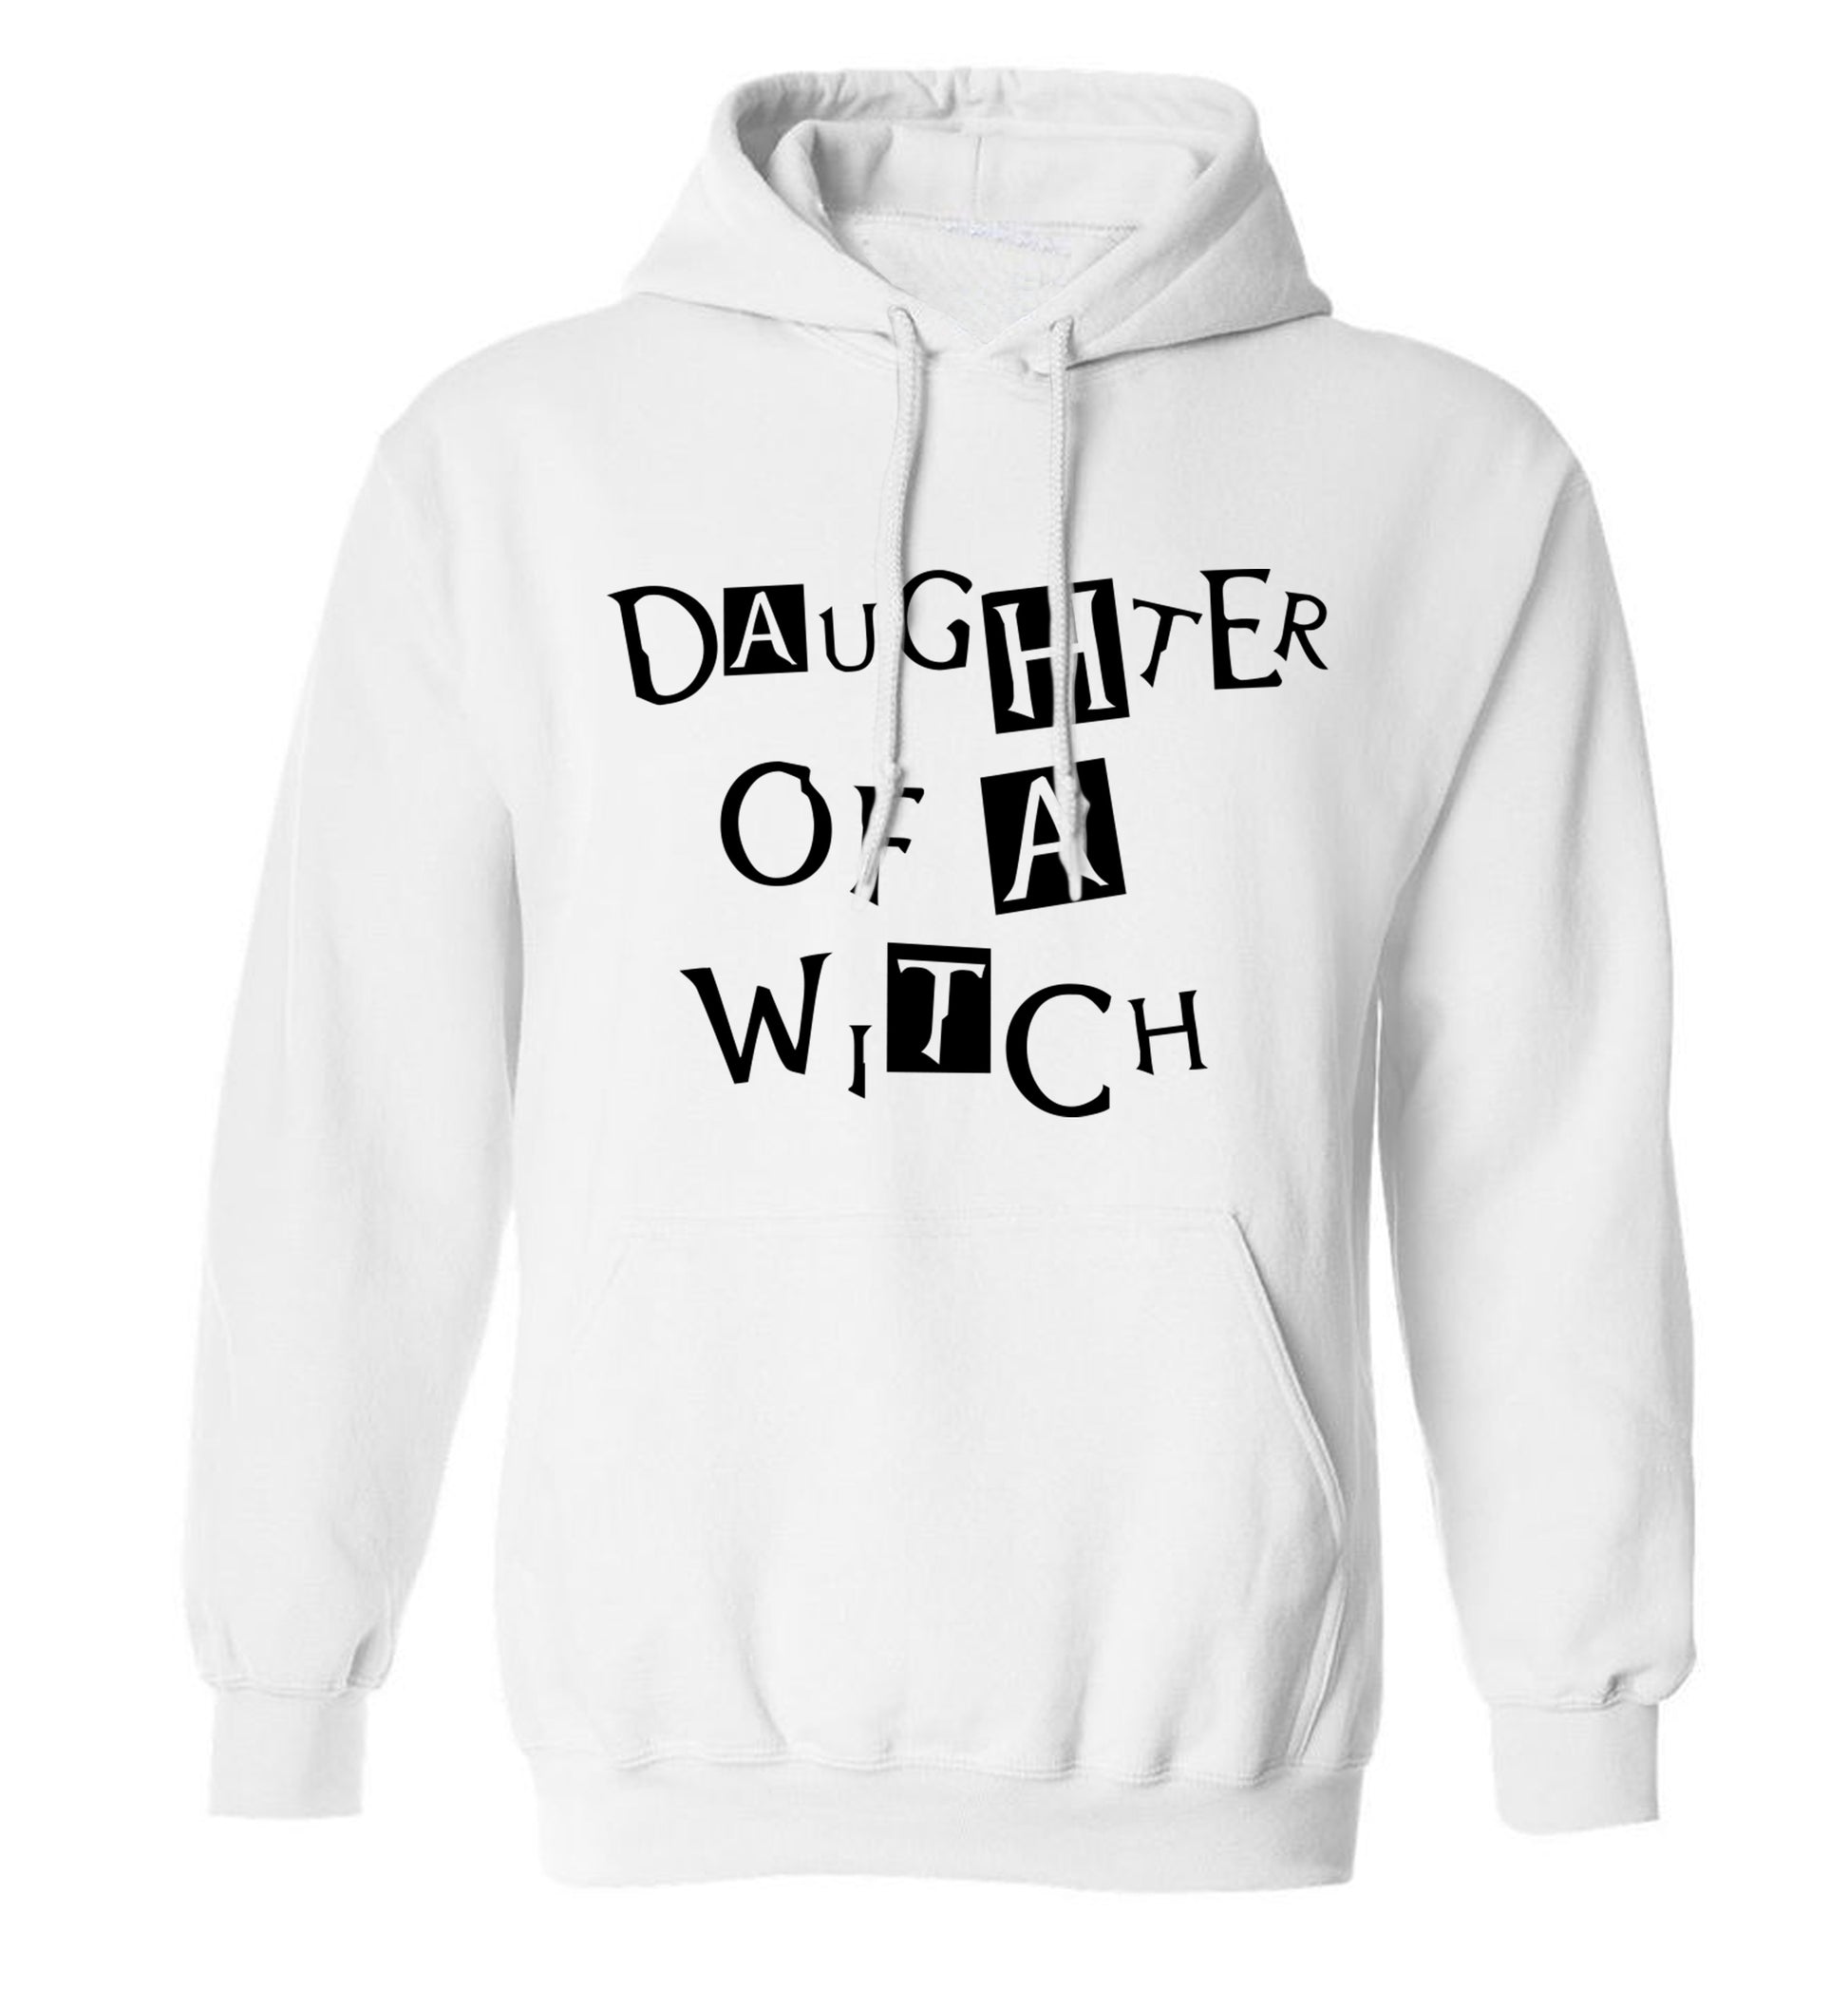 Daughter of a witch adults unisex white hoodie 2XL